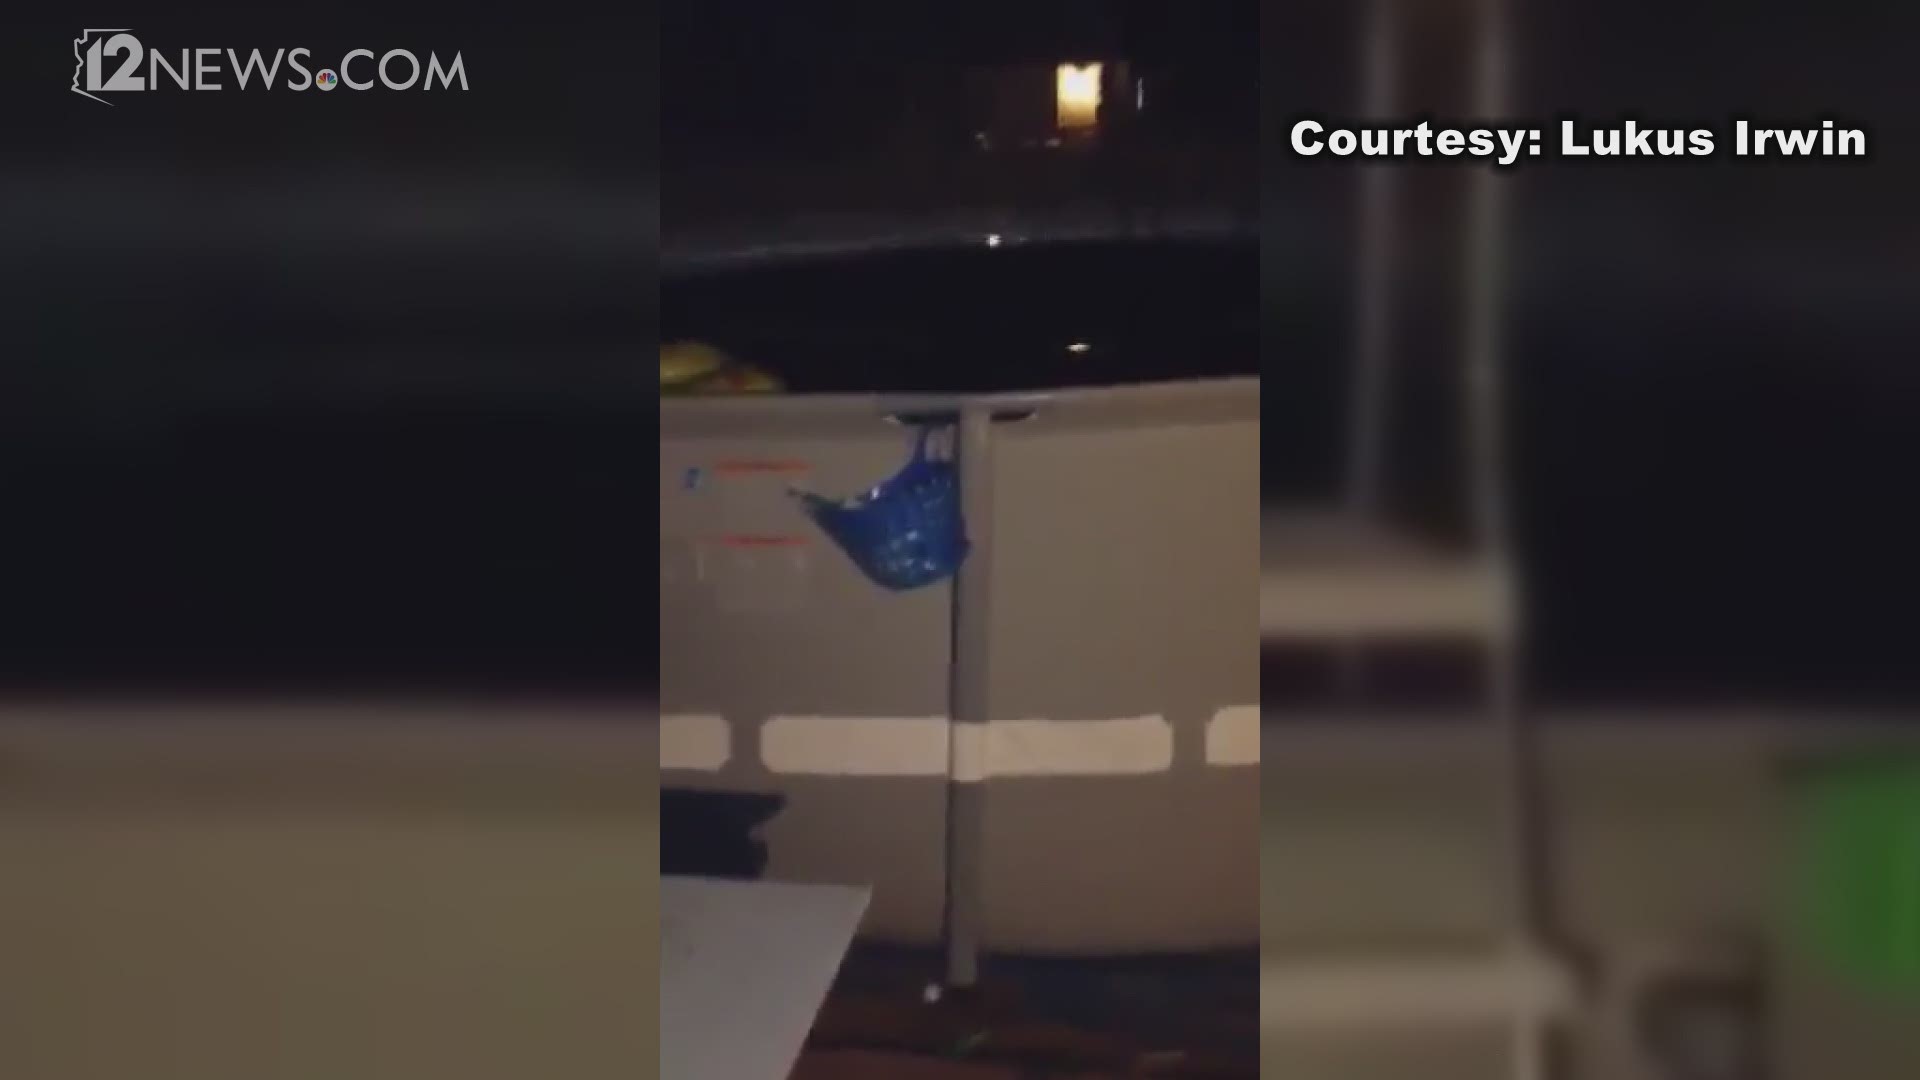 Experts say it couldn't have been an earthquake that caused a pool to slosh water around. The video was shot by Lukus Irwin on May 5, 2016 at about 9:15 p.m.